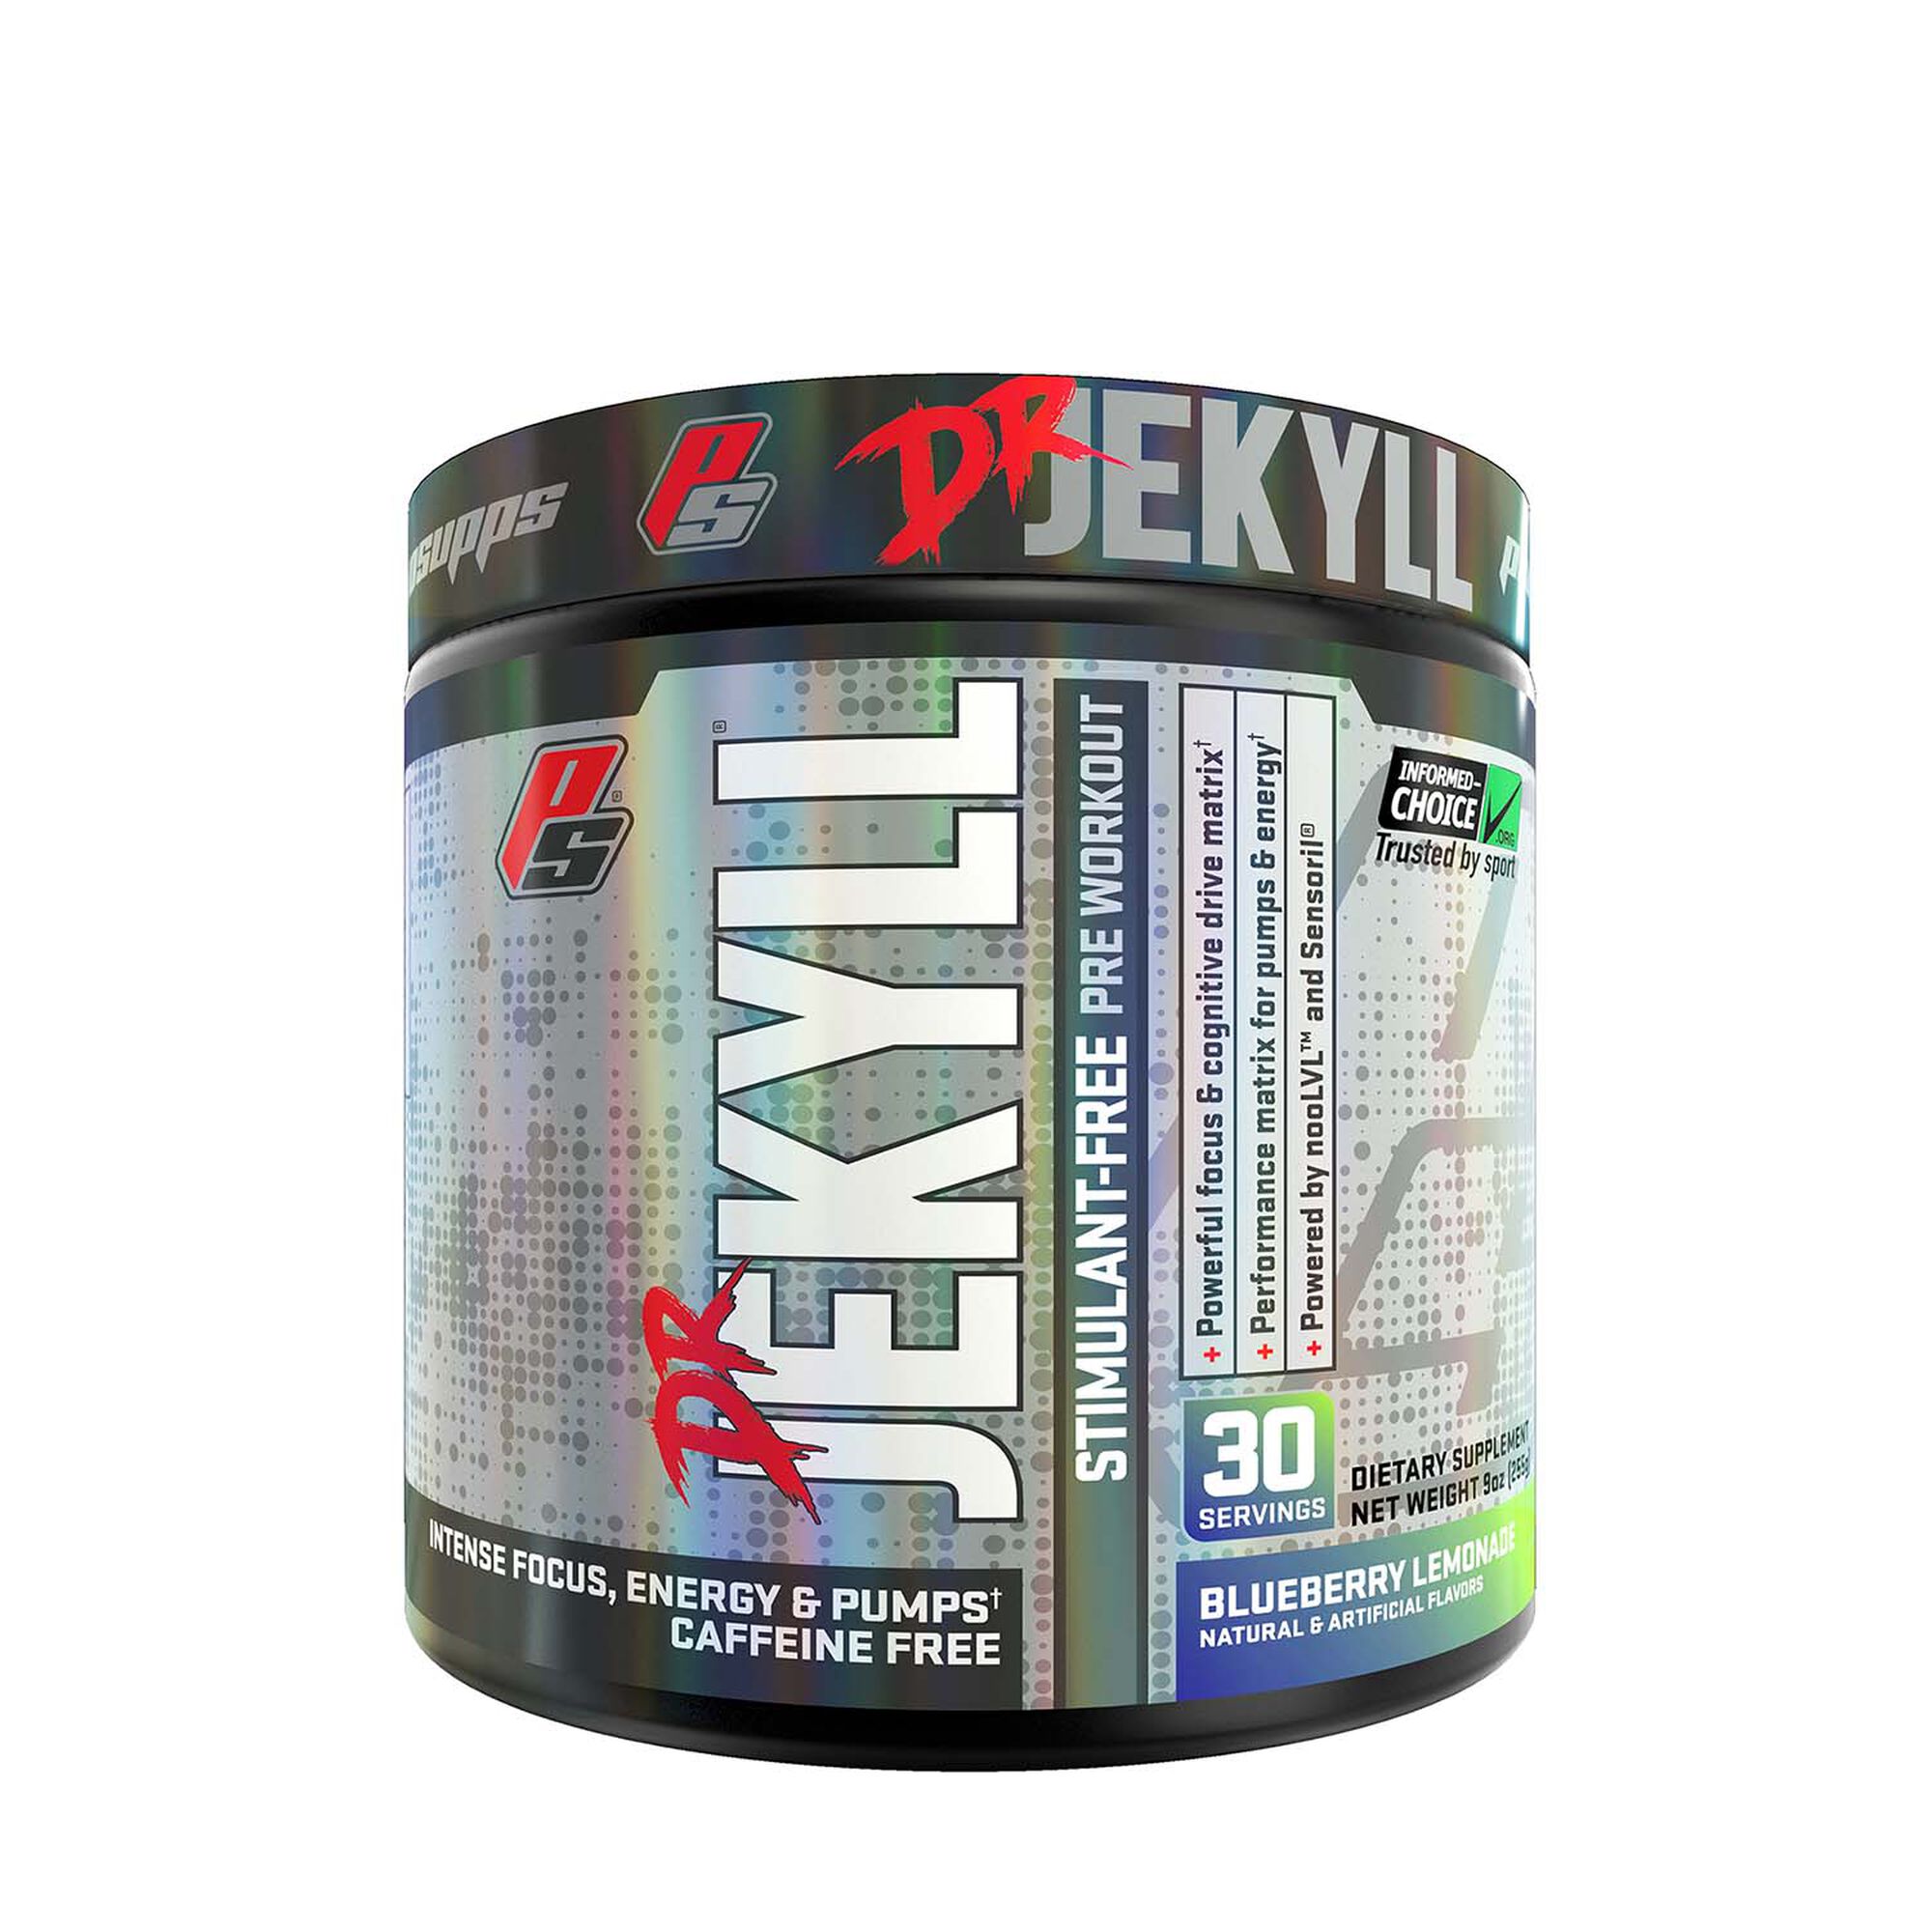  Jekyll pre workout 